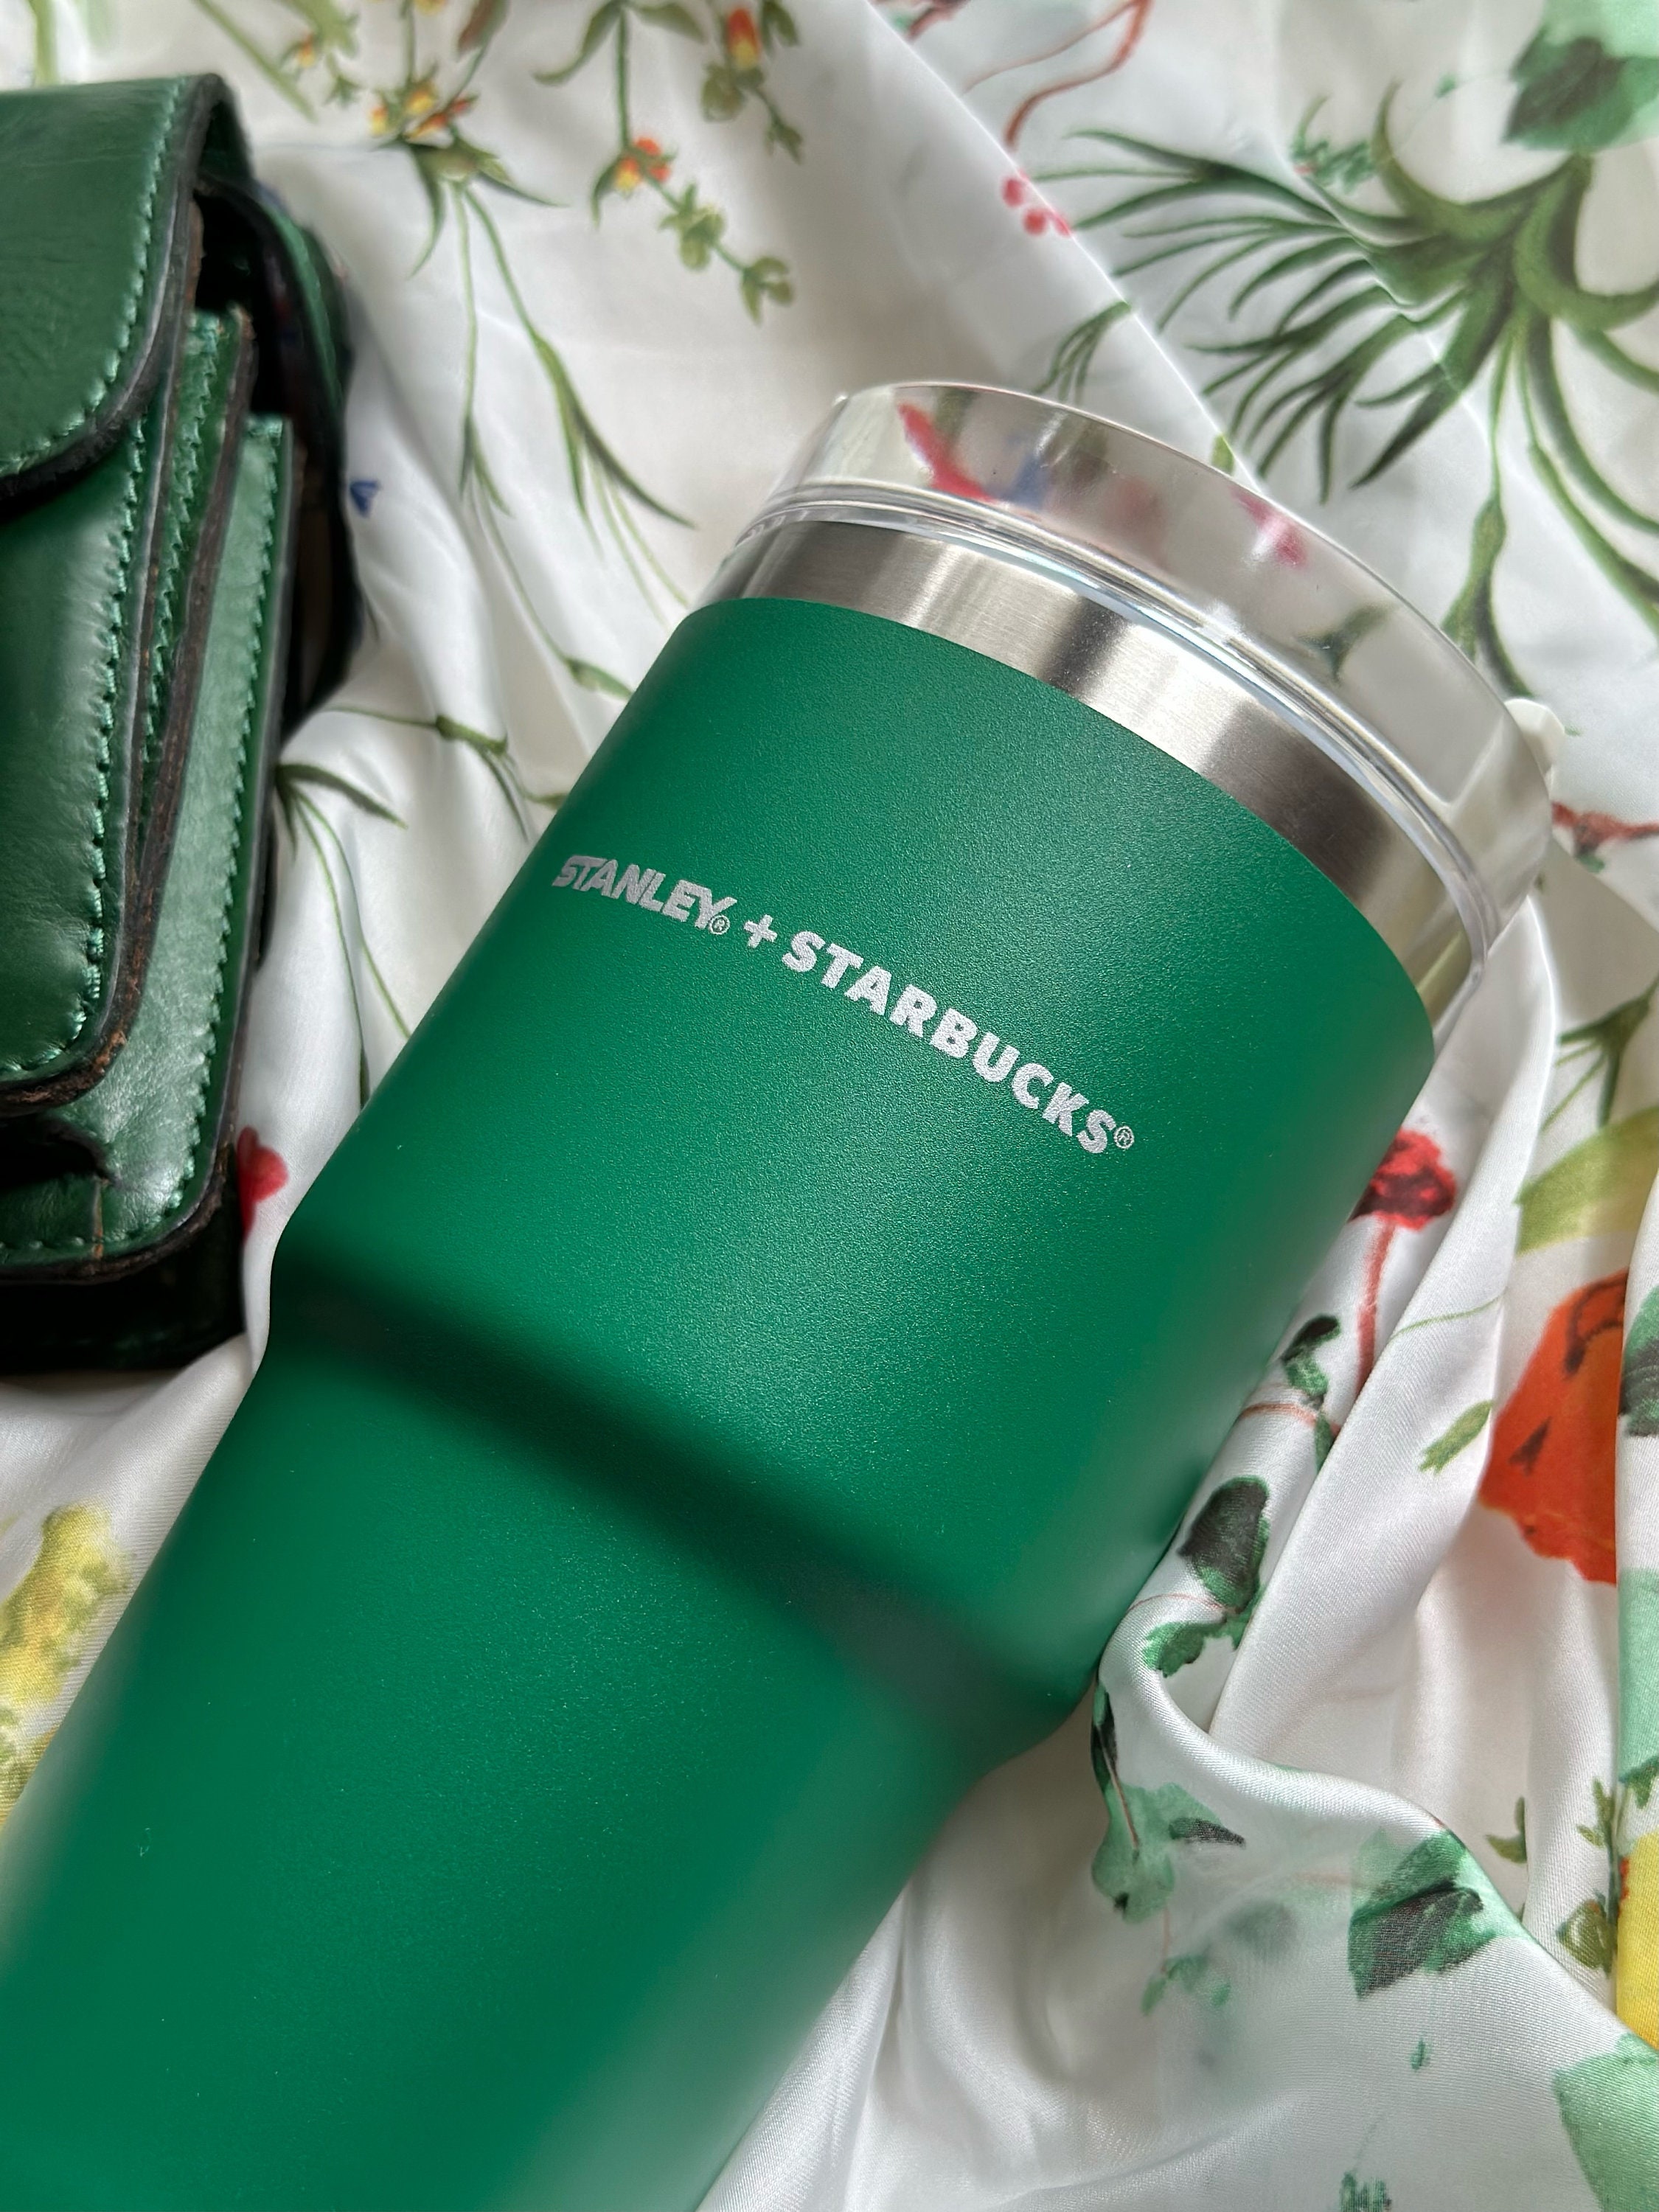 Starbucks Stanley Armed Forces Army Green Vacuum Sealed Cup  Tumbler 20oz: Tumblers & Water Glasses